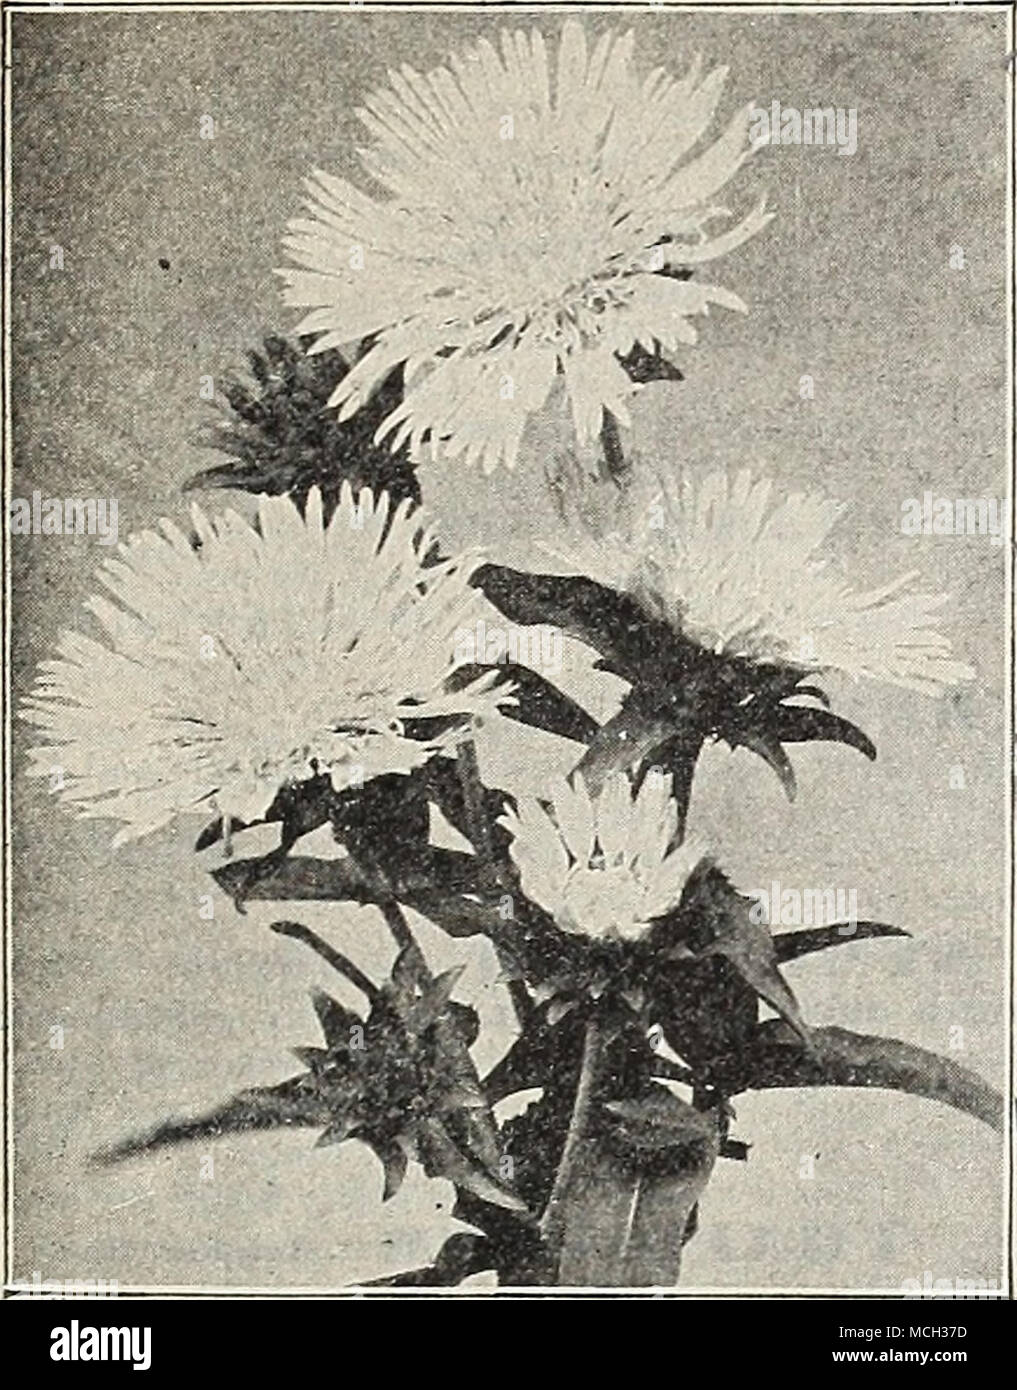 . â¢Vc V^a Stokesia Cyanea (Cornflower Aster). SPIII./52A (Goat's Beard, Meadow Sweet). Aruncus, A noble variety, 3 to 5 feet high, producing in June and July long feathery panicles of white flowers. â Kneiffi, A new variety, 3 to 4 feet high, with foliage divided as fine as a fern, with great sprays of silvery-white flowers in June. 50 cts. each; $5 00 per doz. Astilboides. Feathery white flowers in June; 2 feet. &gt;-V Chinensis. A distinct and handsome species, with large heads of silvery-pink flowers in June and July; 2 feet. 25 cts. each; $2.50 l^er doz. Pilipendula Fl. PI, i^DoubU-flower Stock Photo